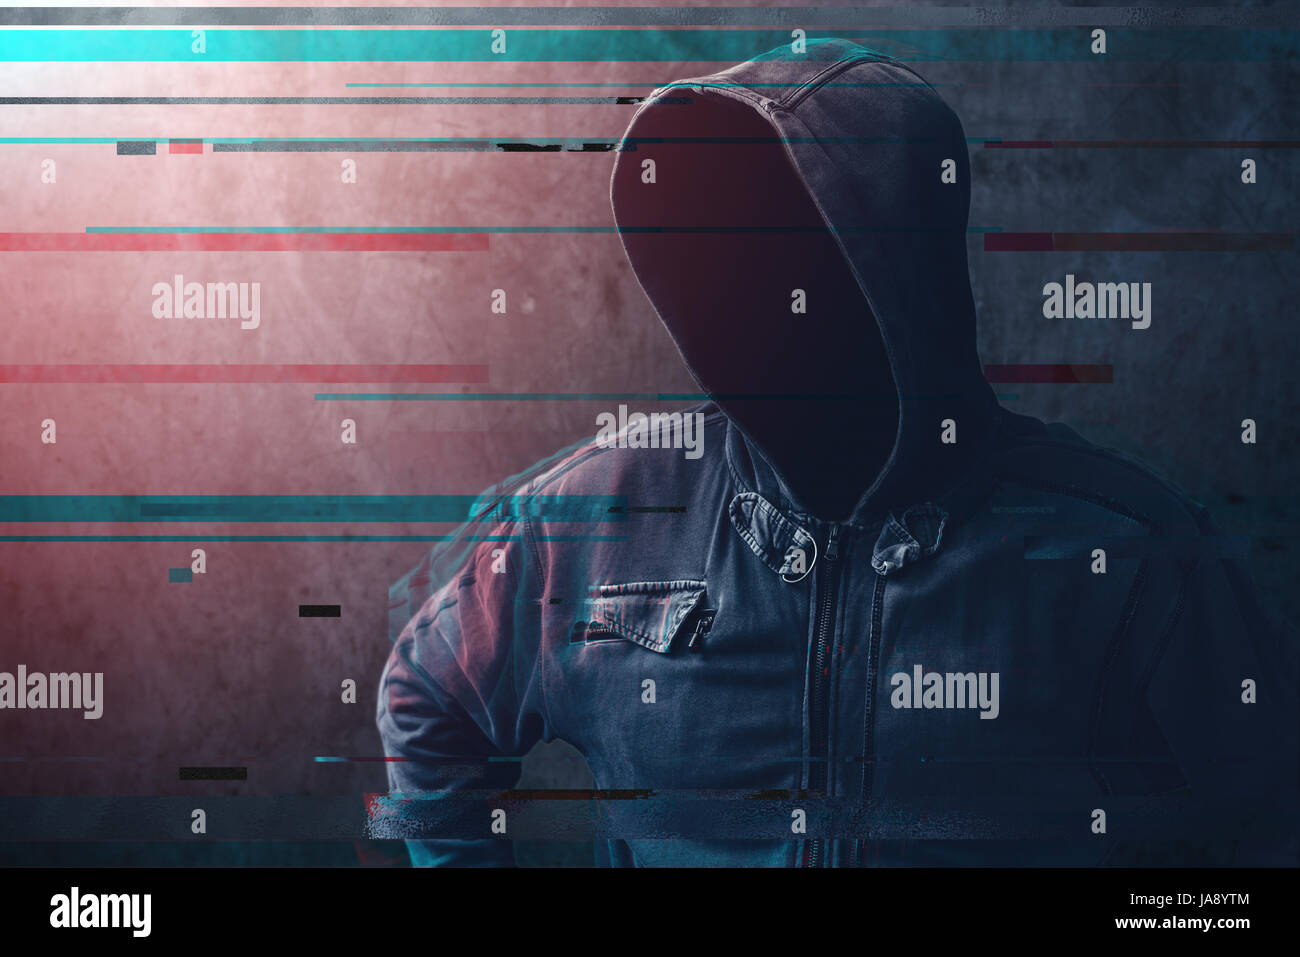 Cyber crime and network security concept, unrecognizable faceless man wearing hooded jacket with digital glitch effect Stock Photo